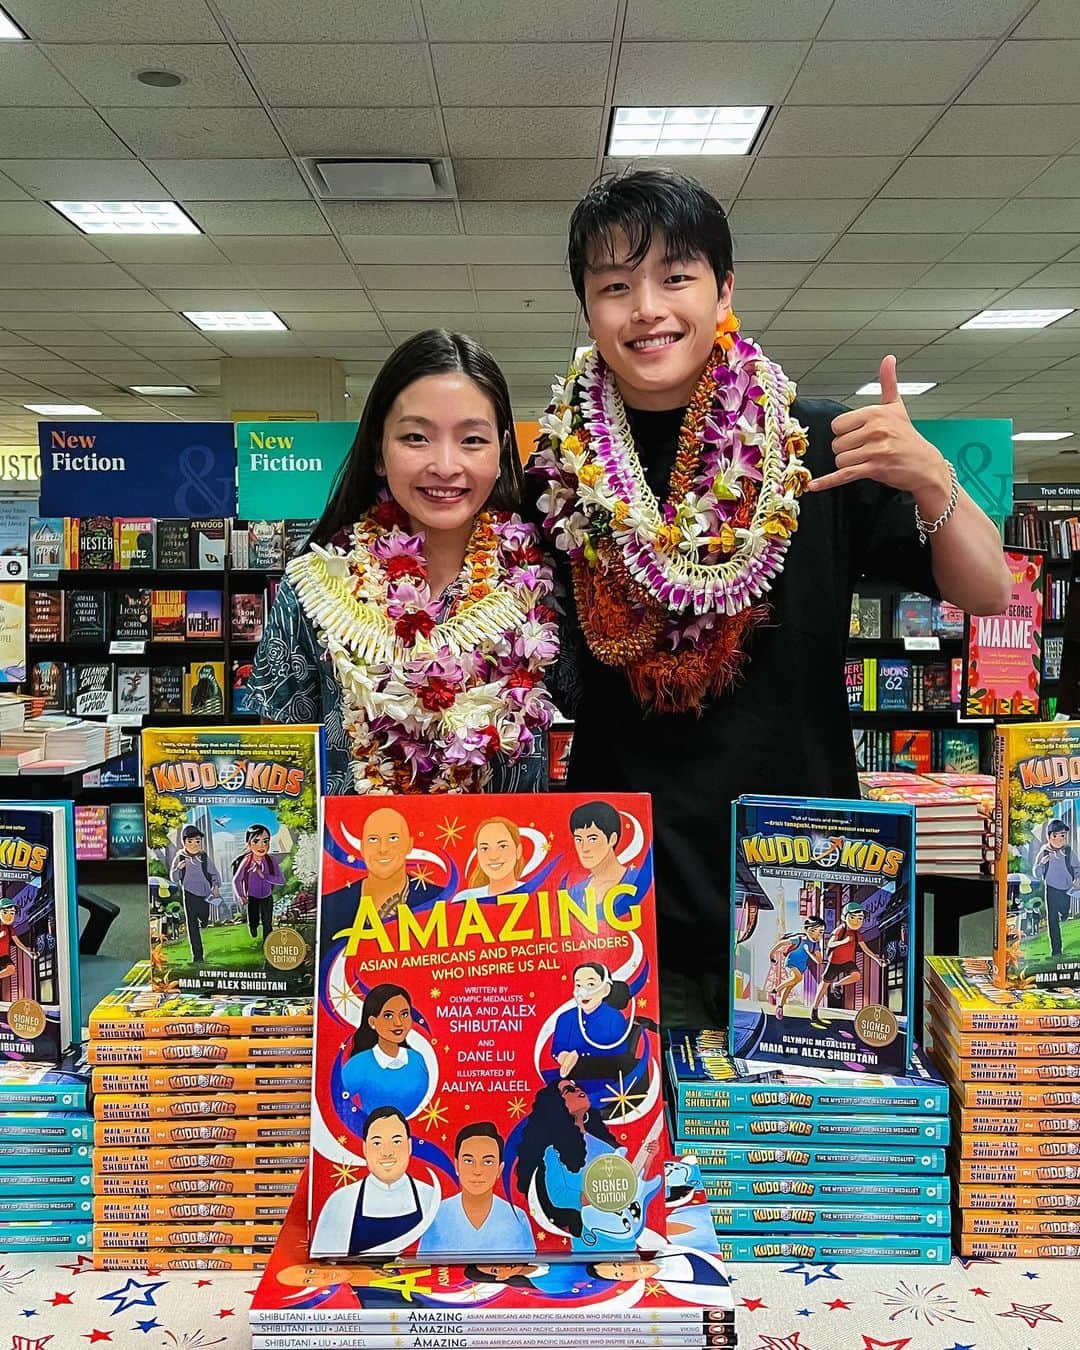 アレックス・シブタニさんのインスタグラム写真 - (アレックス・シブタニInstagram)「HONOLULU! MAHALO! ❤️🤙🌺🌸💐🌼📚✨  🔁 @maiashibutani • Yesterday’s #AmazingAAPI book tour kick-off event was incredible!   While I knew that it was going to be the first event of our Amazing: Asian Americans and Pacific Islanders Who Inspire Us All book tour, I realized when we arrived at @bnalamoana that it was ALSO our first public book event ever! *Our #KudoKids books came out during the height of the pandemic in 2020 and 2021 when in-person events were not possible.  The event started at 2pm and we didn’t end up leaving the store until after 7pm. To all of our friends and supporters, THANK YOU for taking the time to come out and see us. Standing in line were individuals, families, groups of friends, teachers (so many!), skaters (shoutout to the wonderful community at @icepalacehawaii), and fans who have been cheering us on since 2009! Many of you waited in line for over 3 hours!! We are so humbled and honored that the Honolulu community came out to support us and this book—special shoutout to @usjapancouncil, @jcchawaii, and @pigandthelady for spreading the word about our visit to the island.  Thank you for ALL of the beautiful leis, snacks, food recs, cards, and gifts. We enjoyed meeting and talking to each and every one of you. I especially appreciated the kind words about our books, skating, and thoughtful check-ins on my health. 🧡  Alex and I are really passionate and intentional about everything we do and believe in the power and possibilities of this new book, AMAZING. Our hope is that it can be a game changer for AAPI representation in kid’s literature, as well as advance the ongoing effort for AAPI history inclusion in K-12 curriculum across the United States.   To Haunani, Ross, and rest of the wonderful B&N staff, thank you for hosting us. The beautiful window display at @alamoanacenter was our FIRST and we will never forget it! 🤙  To Jenny, Dane, Aaliya, Opal, and the rest of the team at Viking + @penguinkids, thank you for your hard work and belief in this book. 🙏  To top it all off, part-way through our signing I got a very a special Twitter notification. More on that in my next post! 😉  The link to preorder AMAZING is in my bio! 🫶✨」4月11日 8時48分 - shibsibs